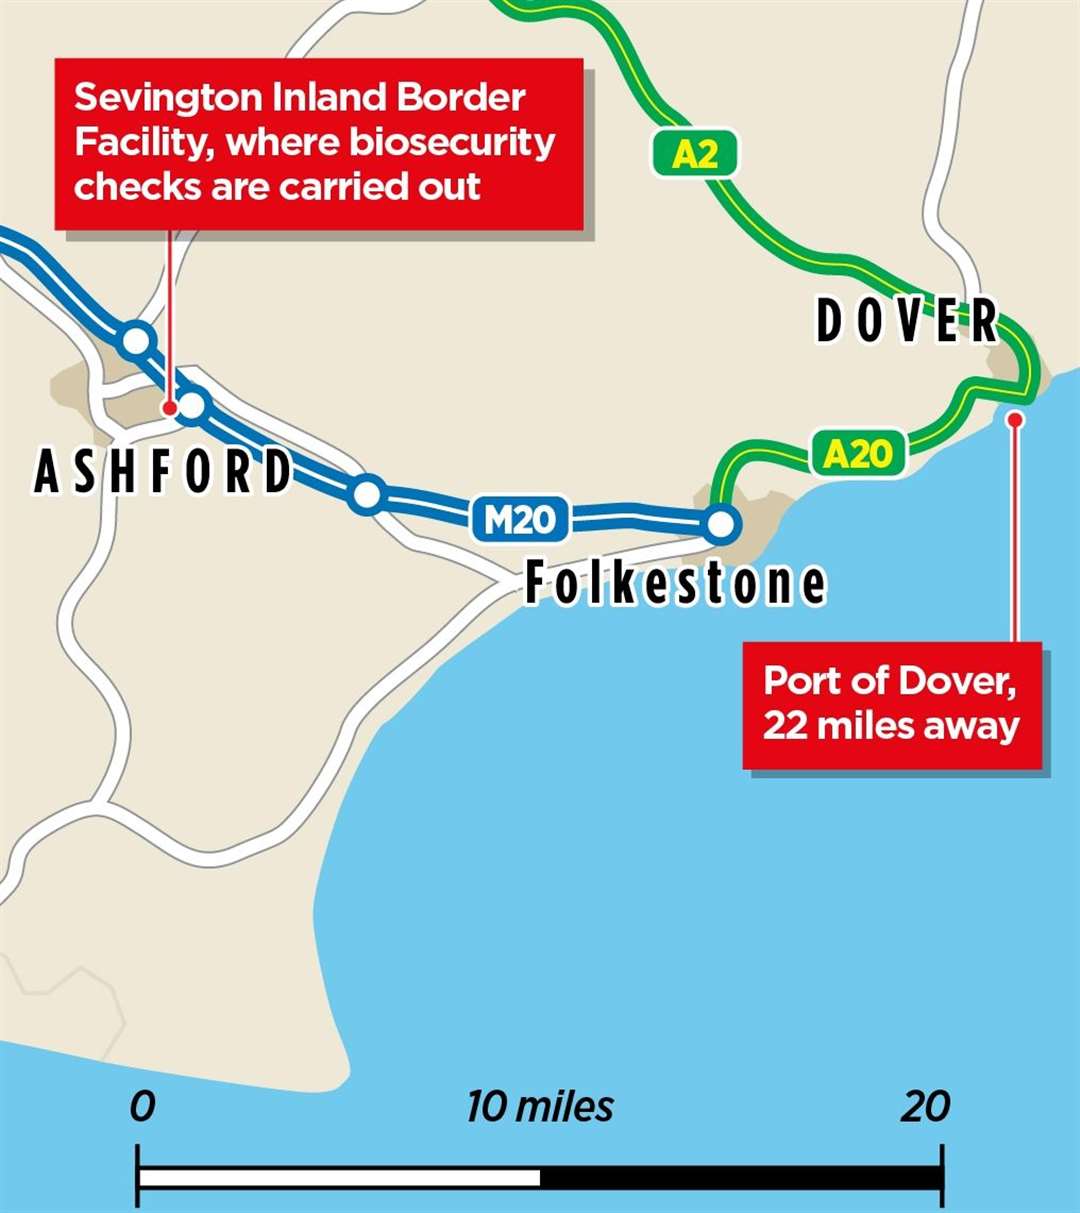 Twenty-two miles separate the Port of Dover and Sevington Inland Border Facility, where the Sevington Border Control Post is based